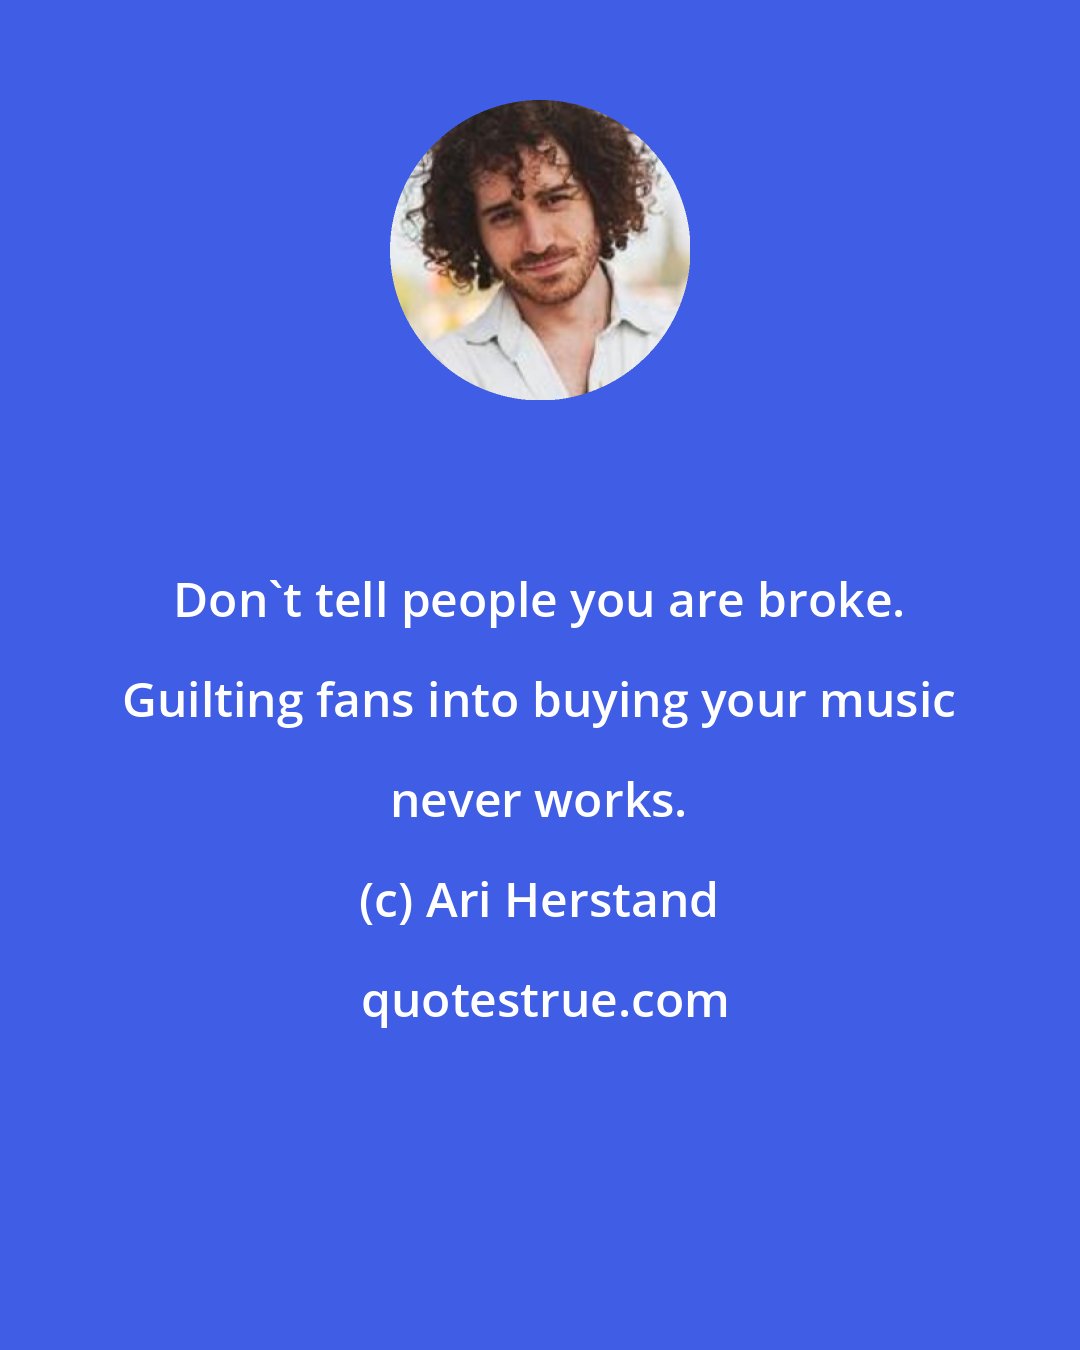 Ari Herstand: Don't tell people you are broke. Guilting fans into buying your music never works.